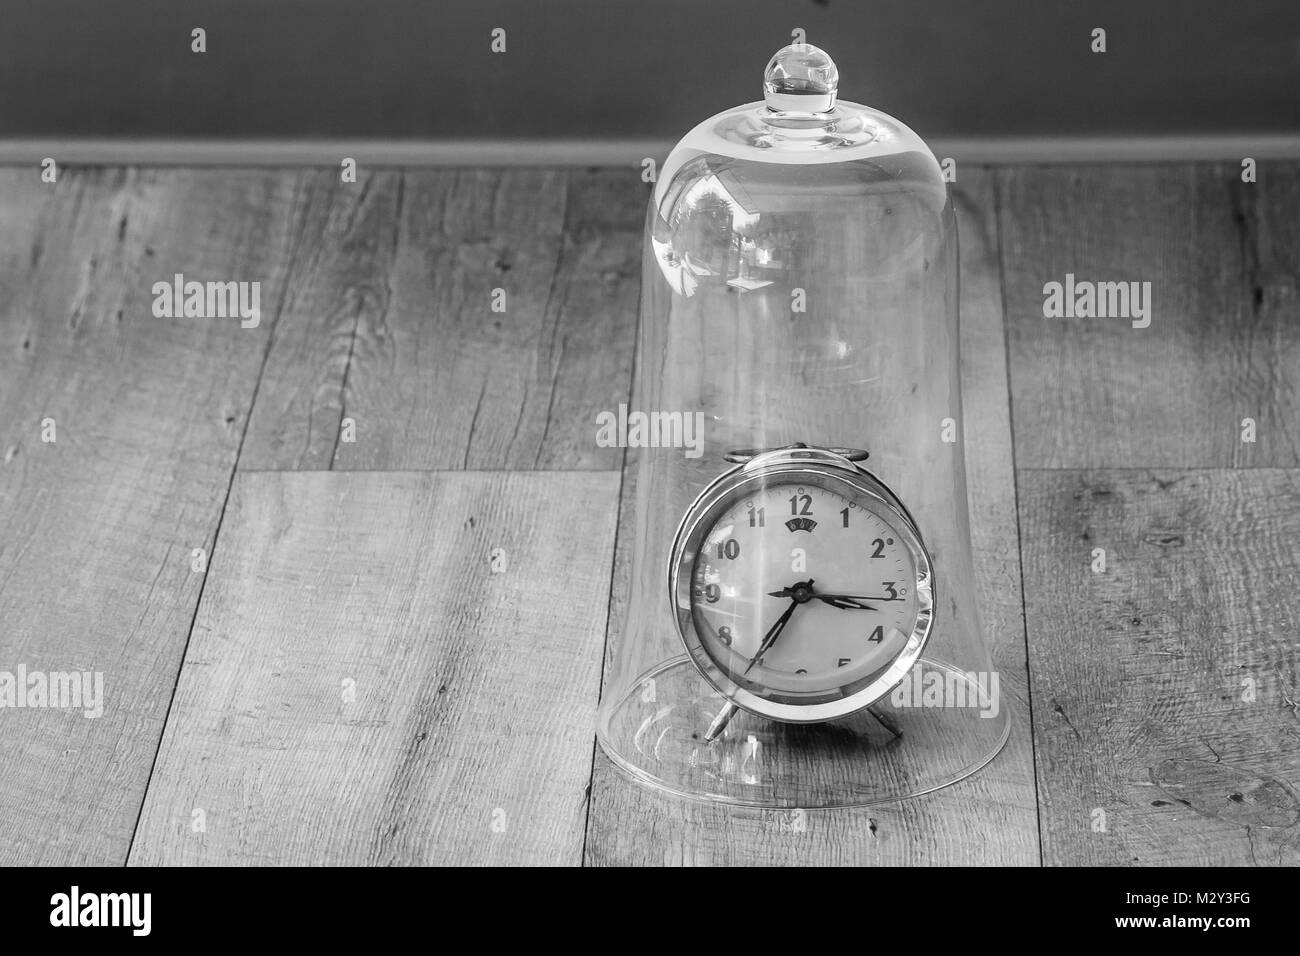 Time Management Concept : Close up red vintage alarm clock be distorted and damaged setting on wooden floor in the glass dome. Stock Photo